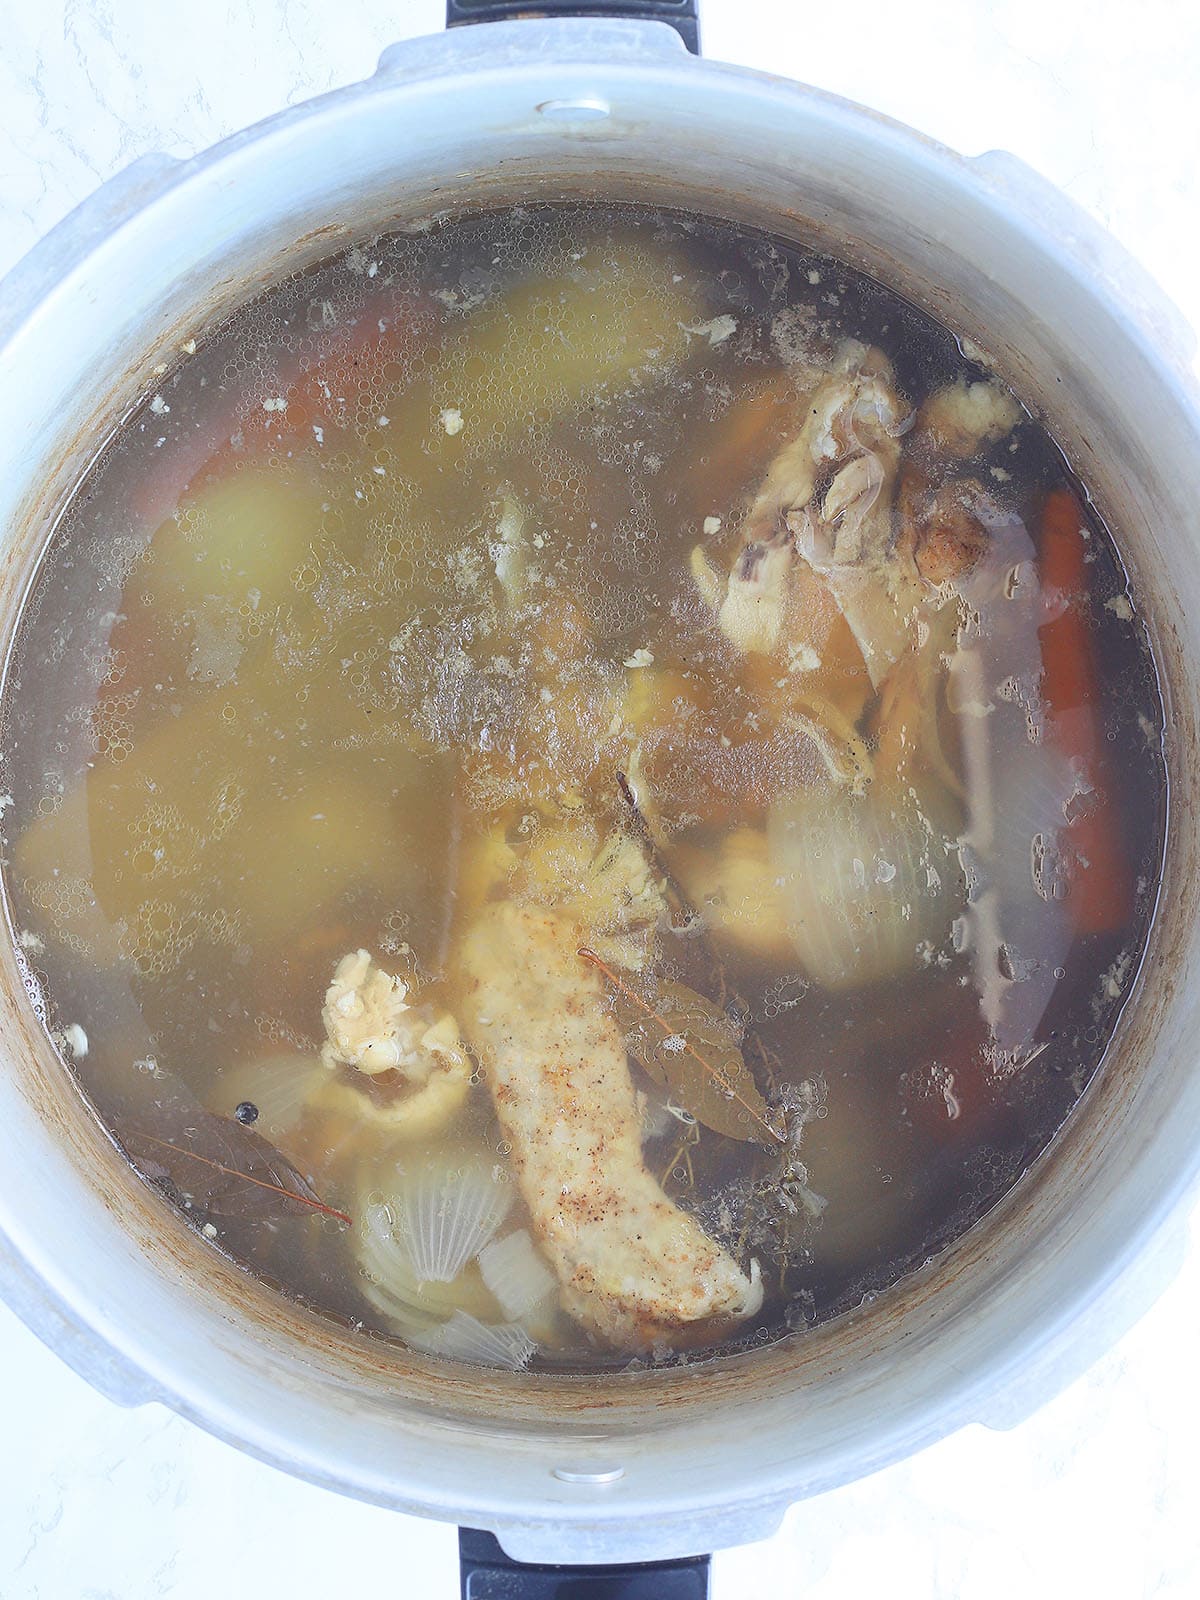 Homemade chicken stock after it has simmered for several hours.